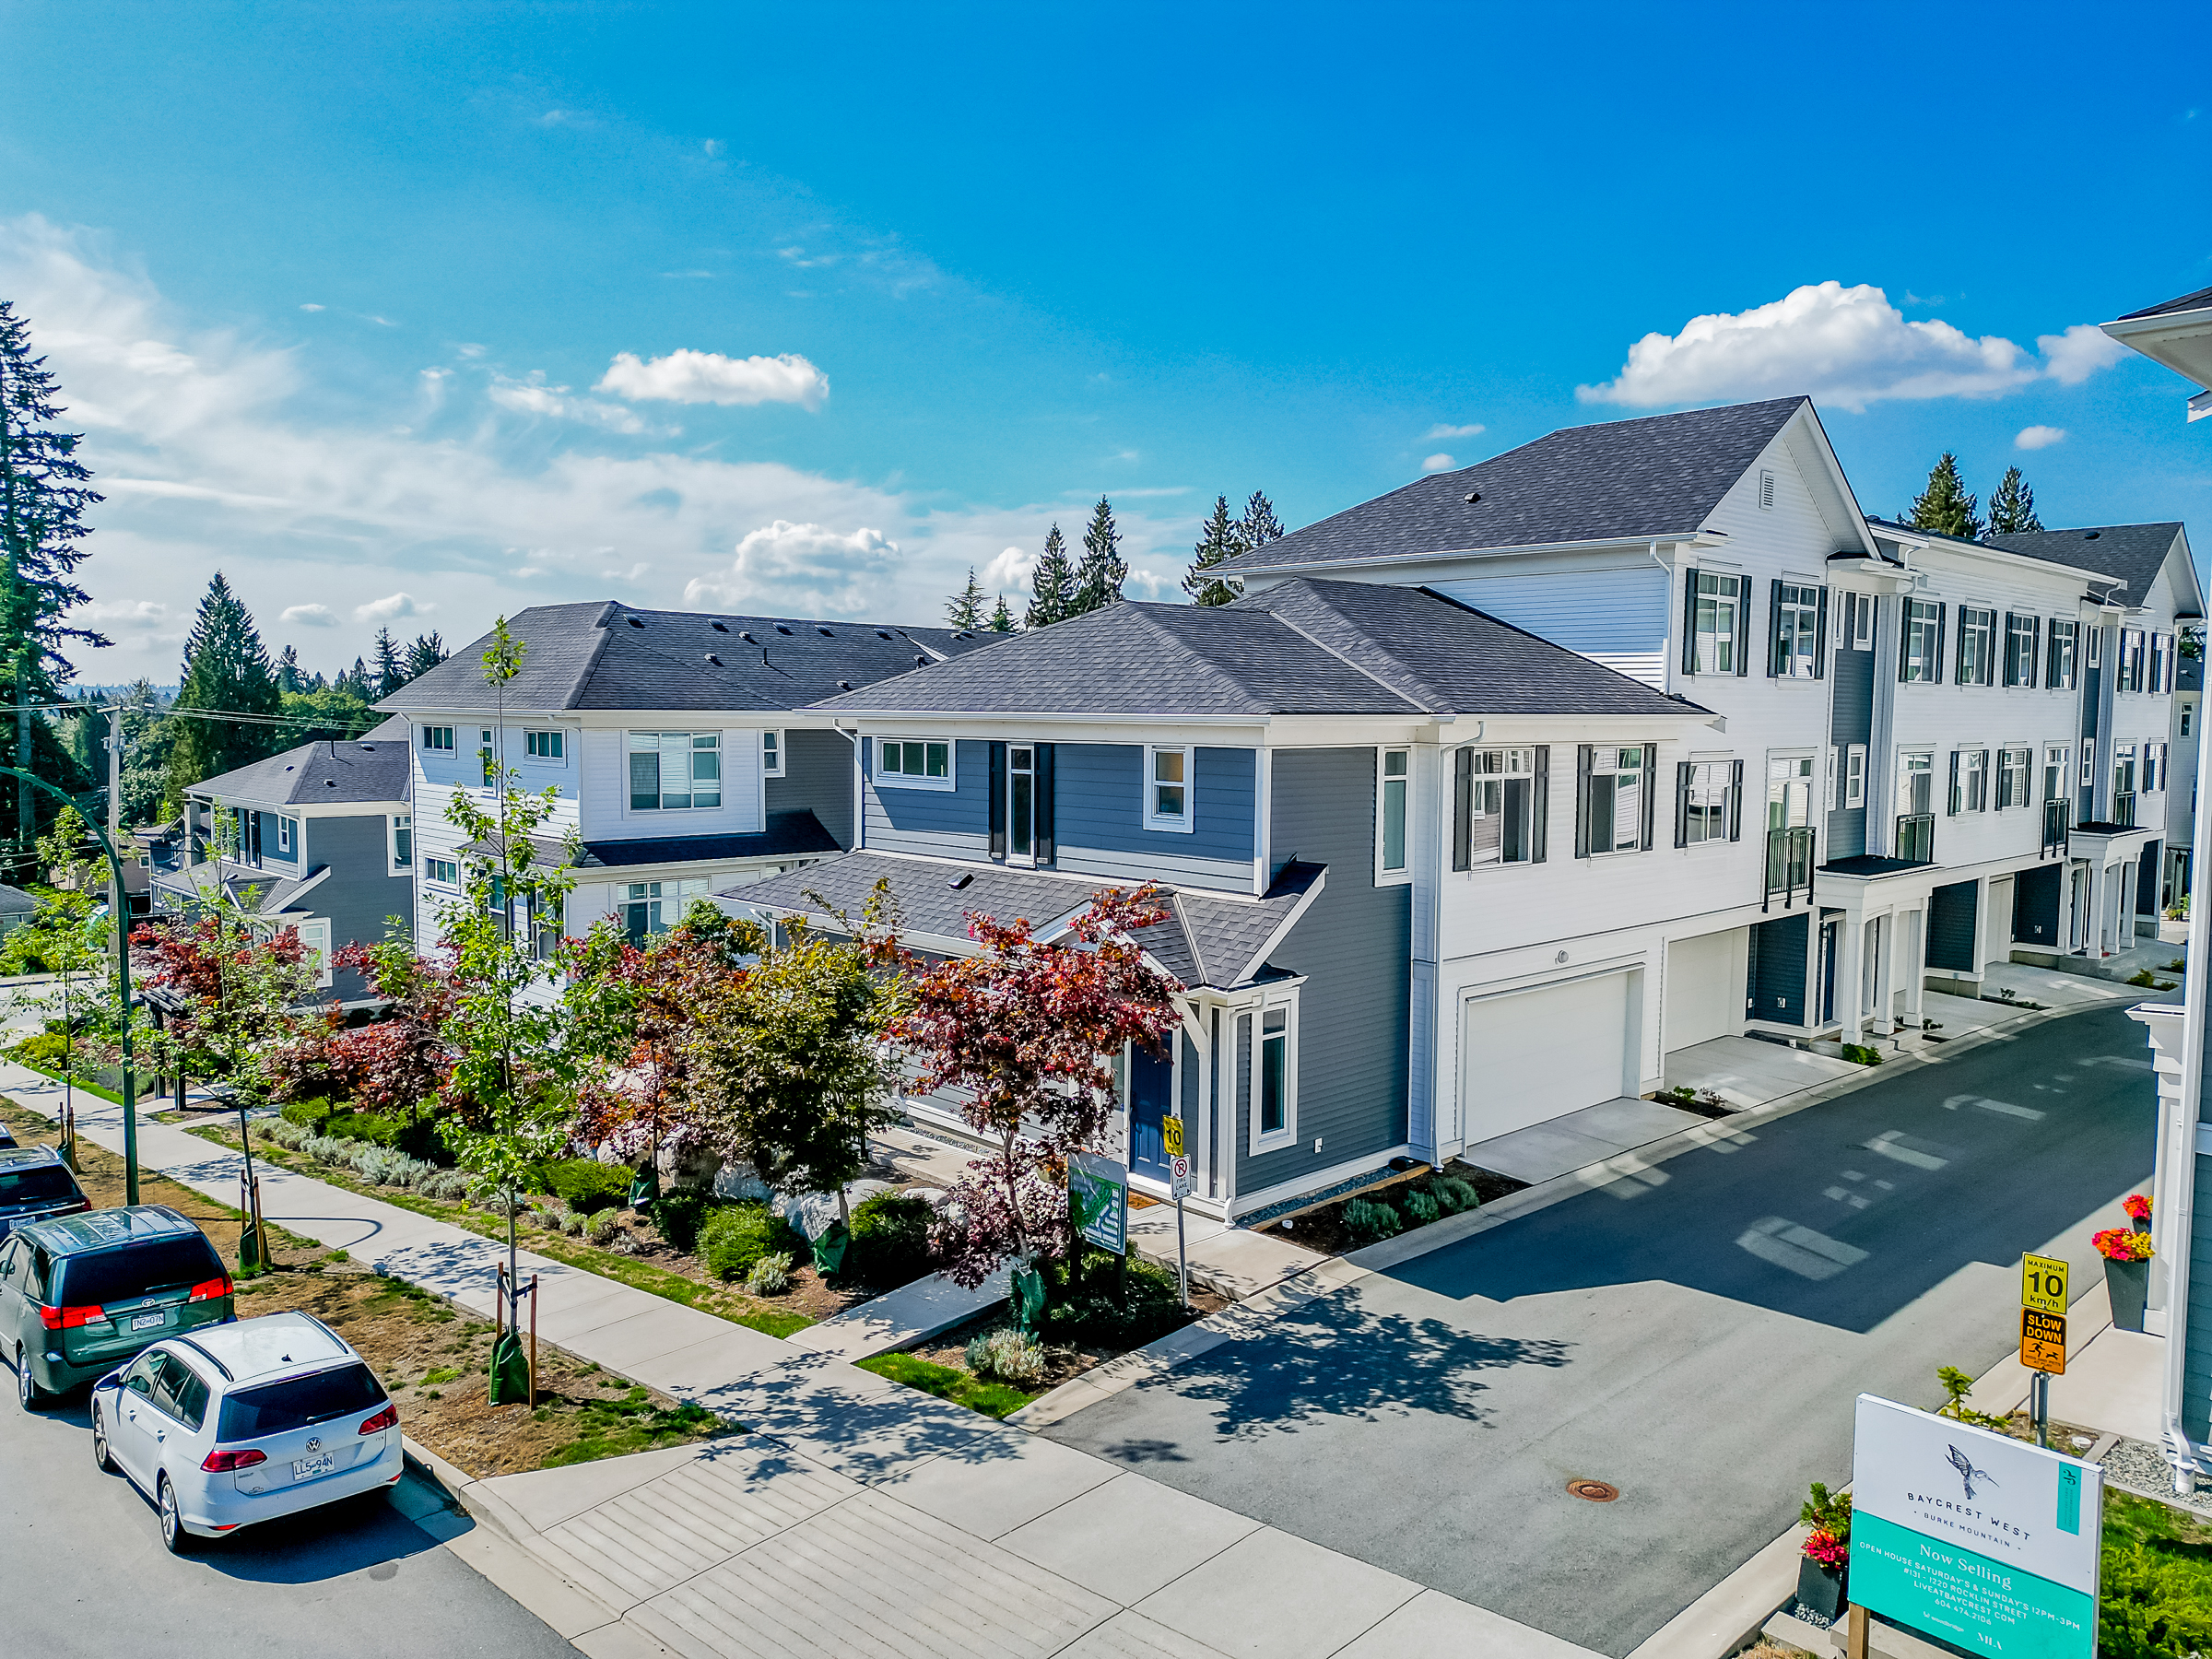 Burke Mountain Townhome For Sale Krista Lapp Unit 173 1220 Rocklin Street Coquitlam Real Estate Listings Drone